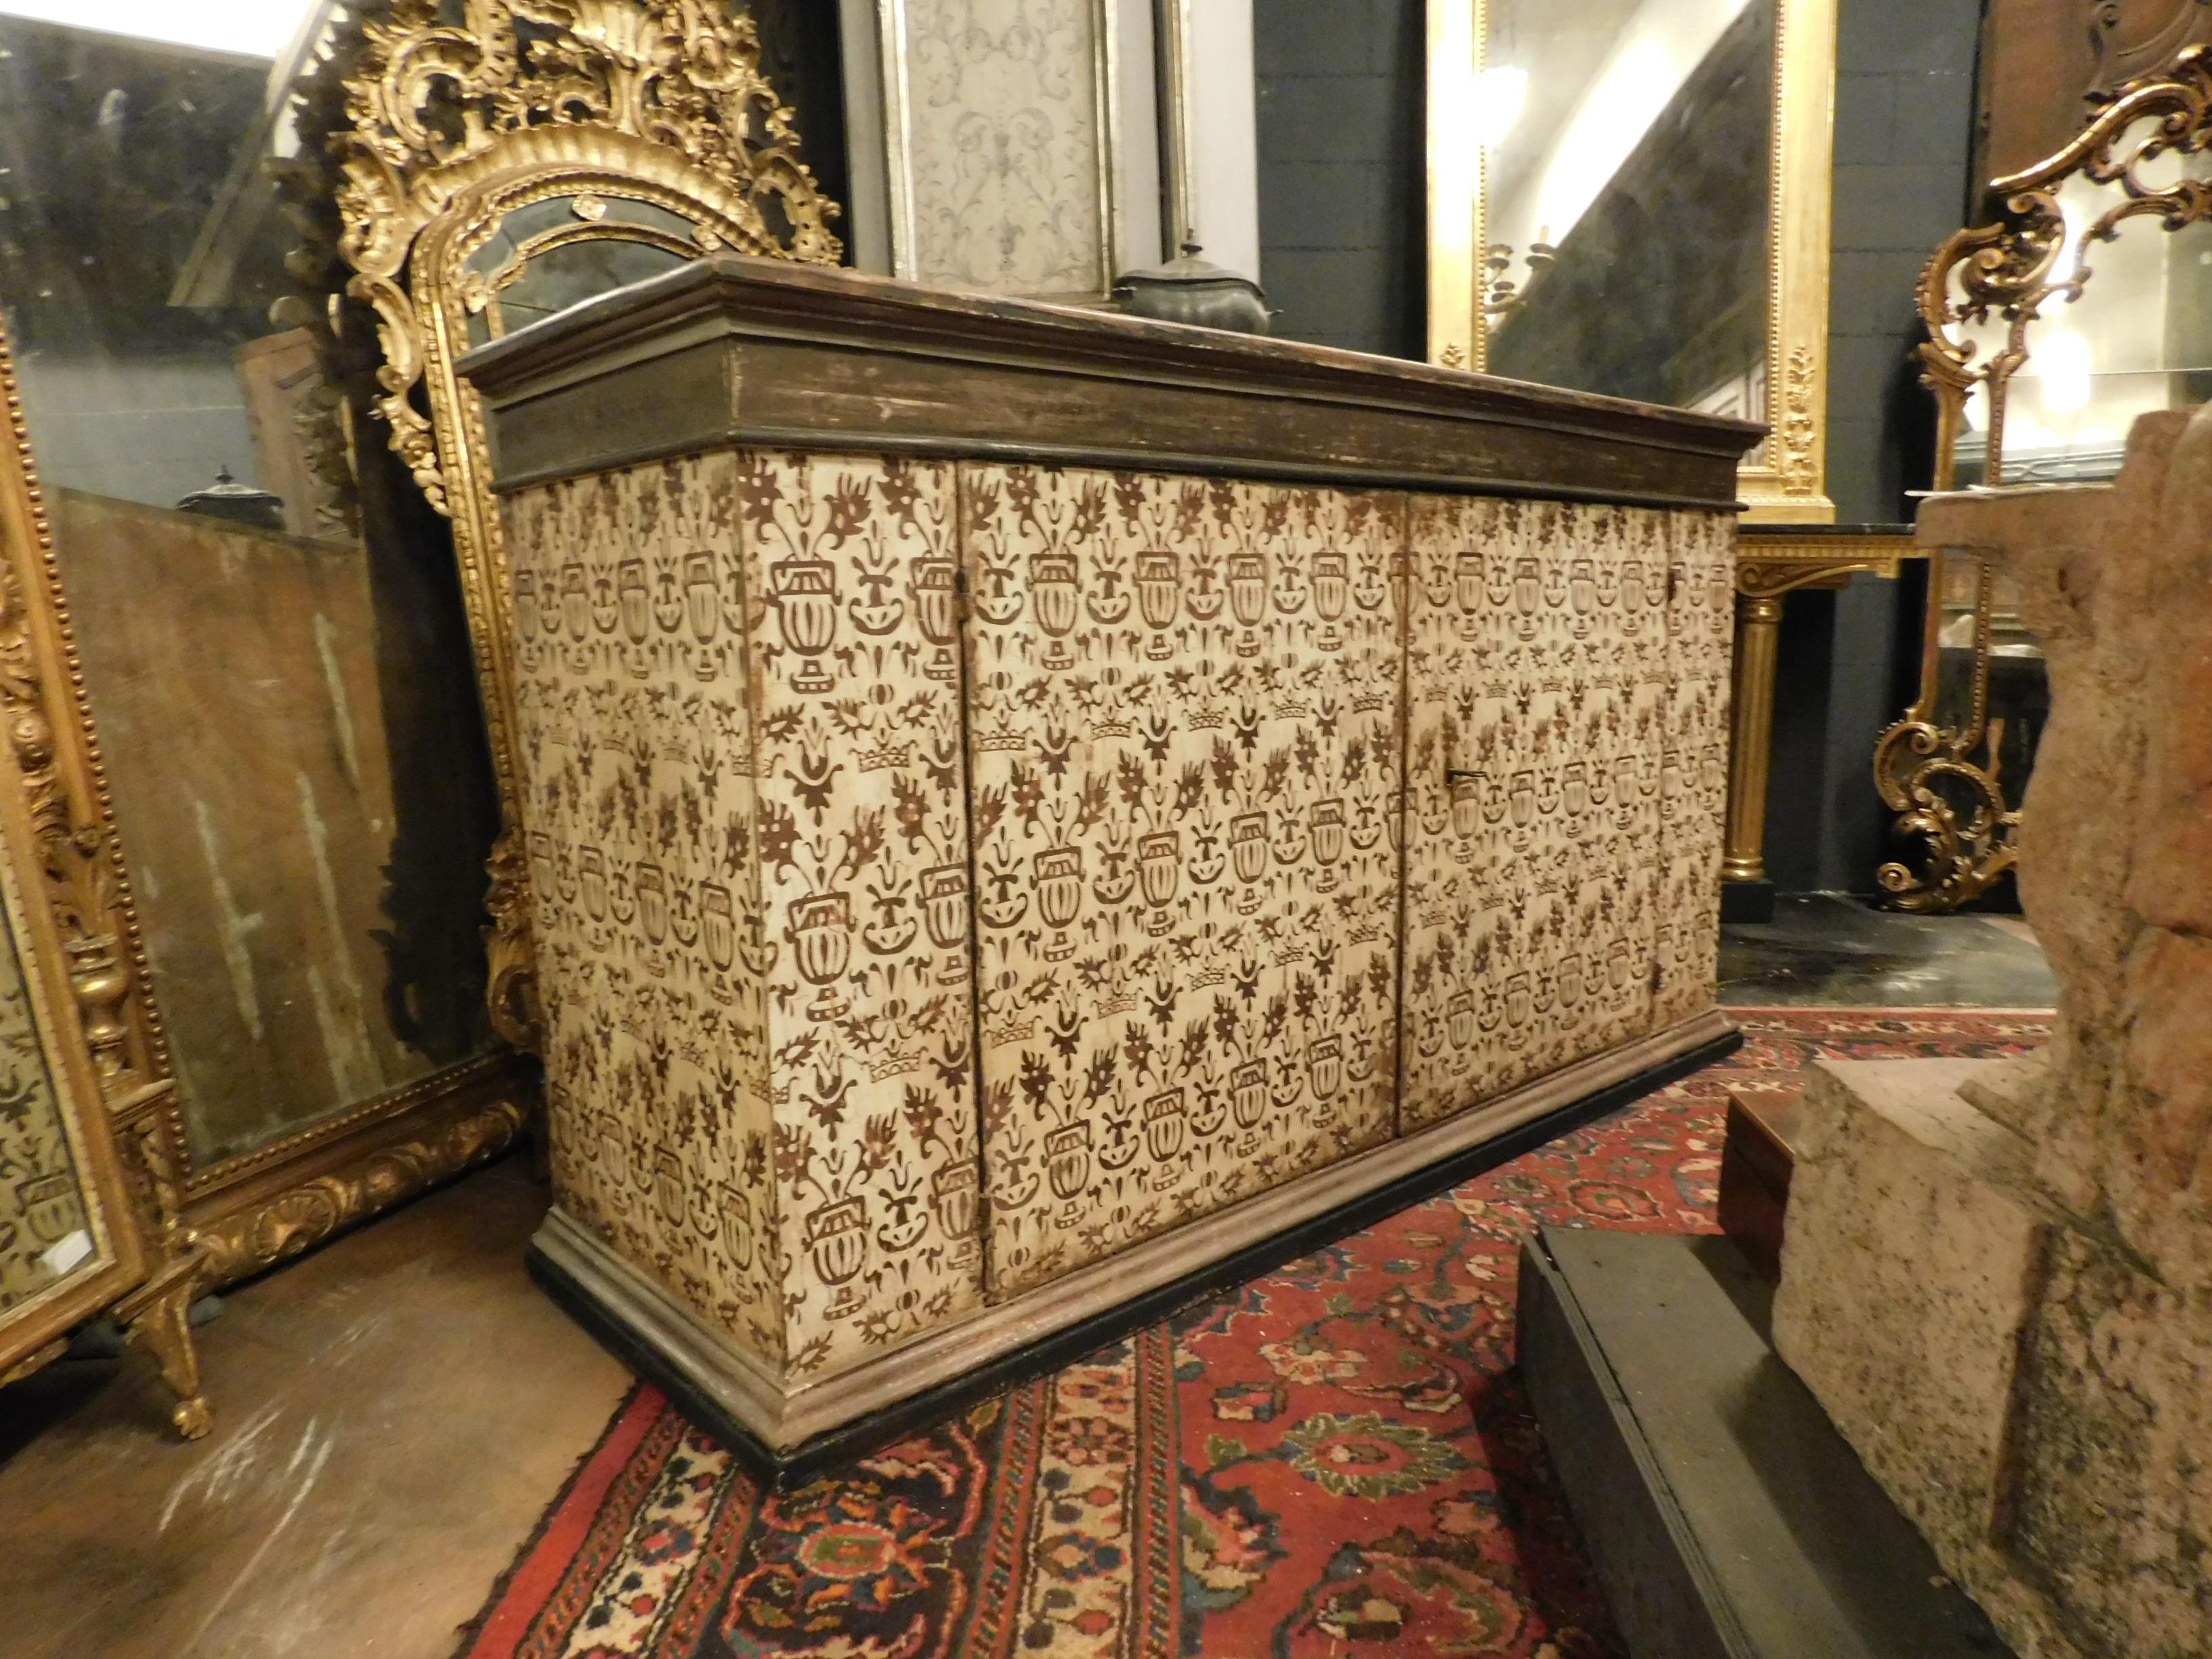 Hand-Carved Antique Sideboard in Lacquered and Painted Wood, 17th Century, Florence, Italy